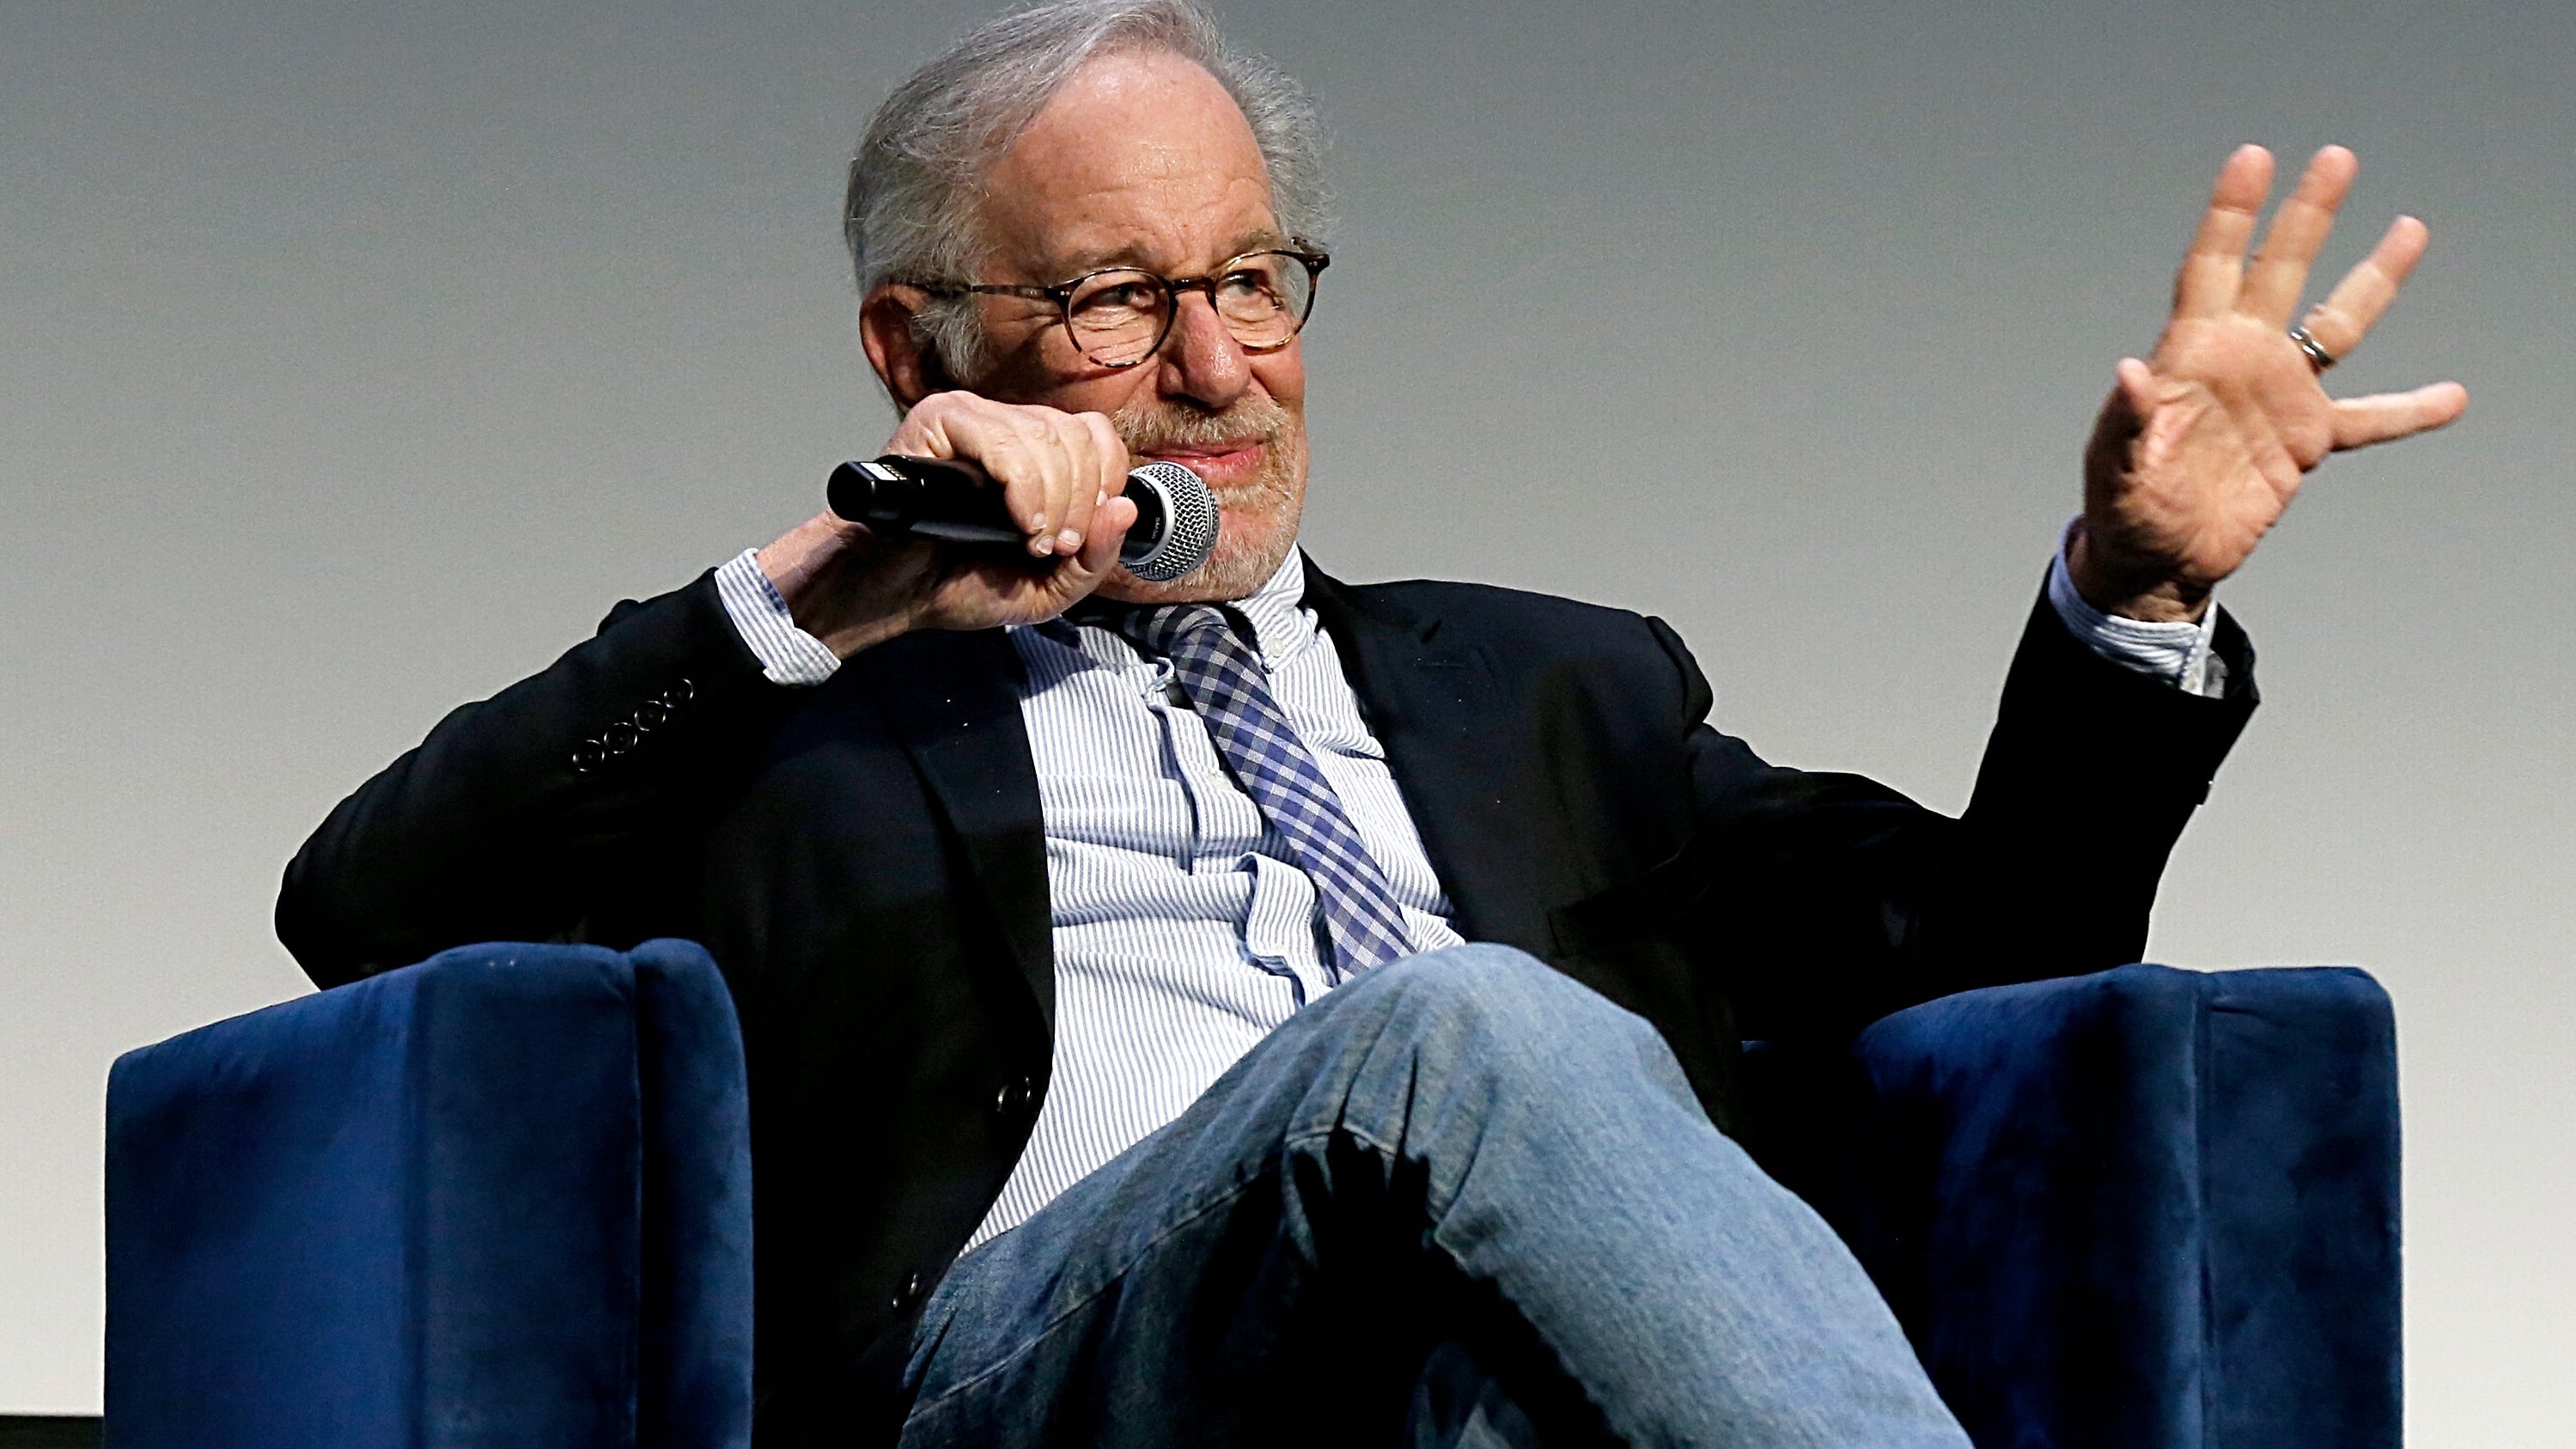 Steven Spielberg gets emotional over Goldie Hawn tribute at Tribeca: 'Really moved'